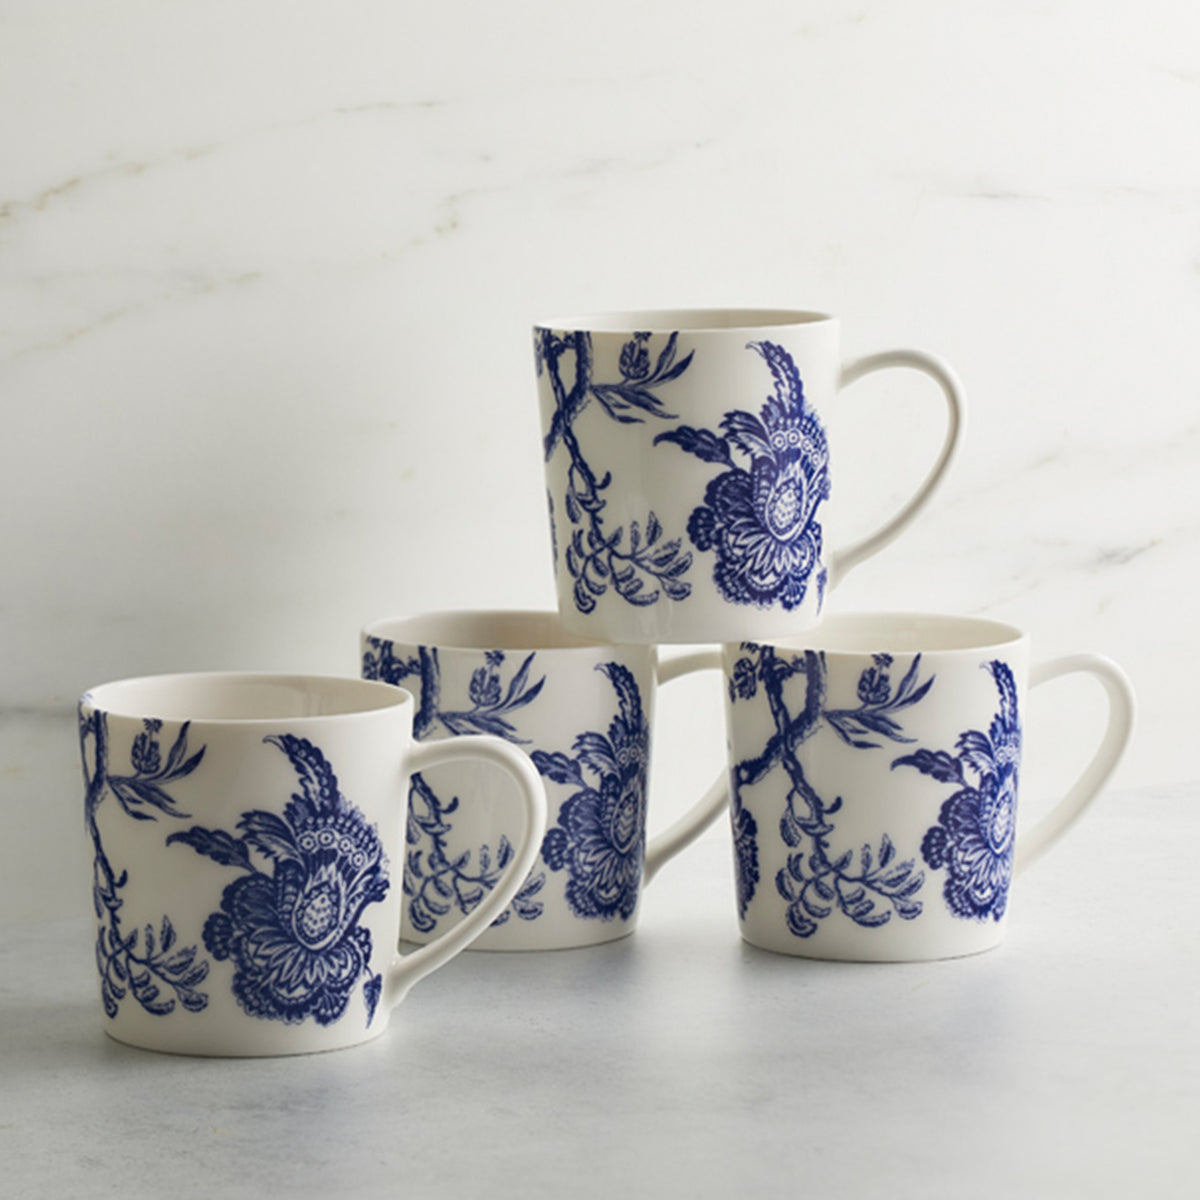 Four Arcadia Mugs by Caskata Artisanal Home, inspired by the Williamsburg Foundation, are arranged on a light gray surface against a white marble background.